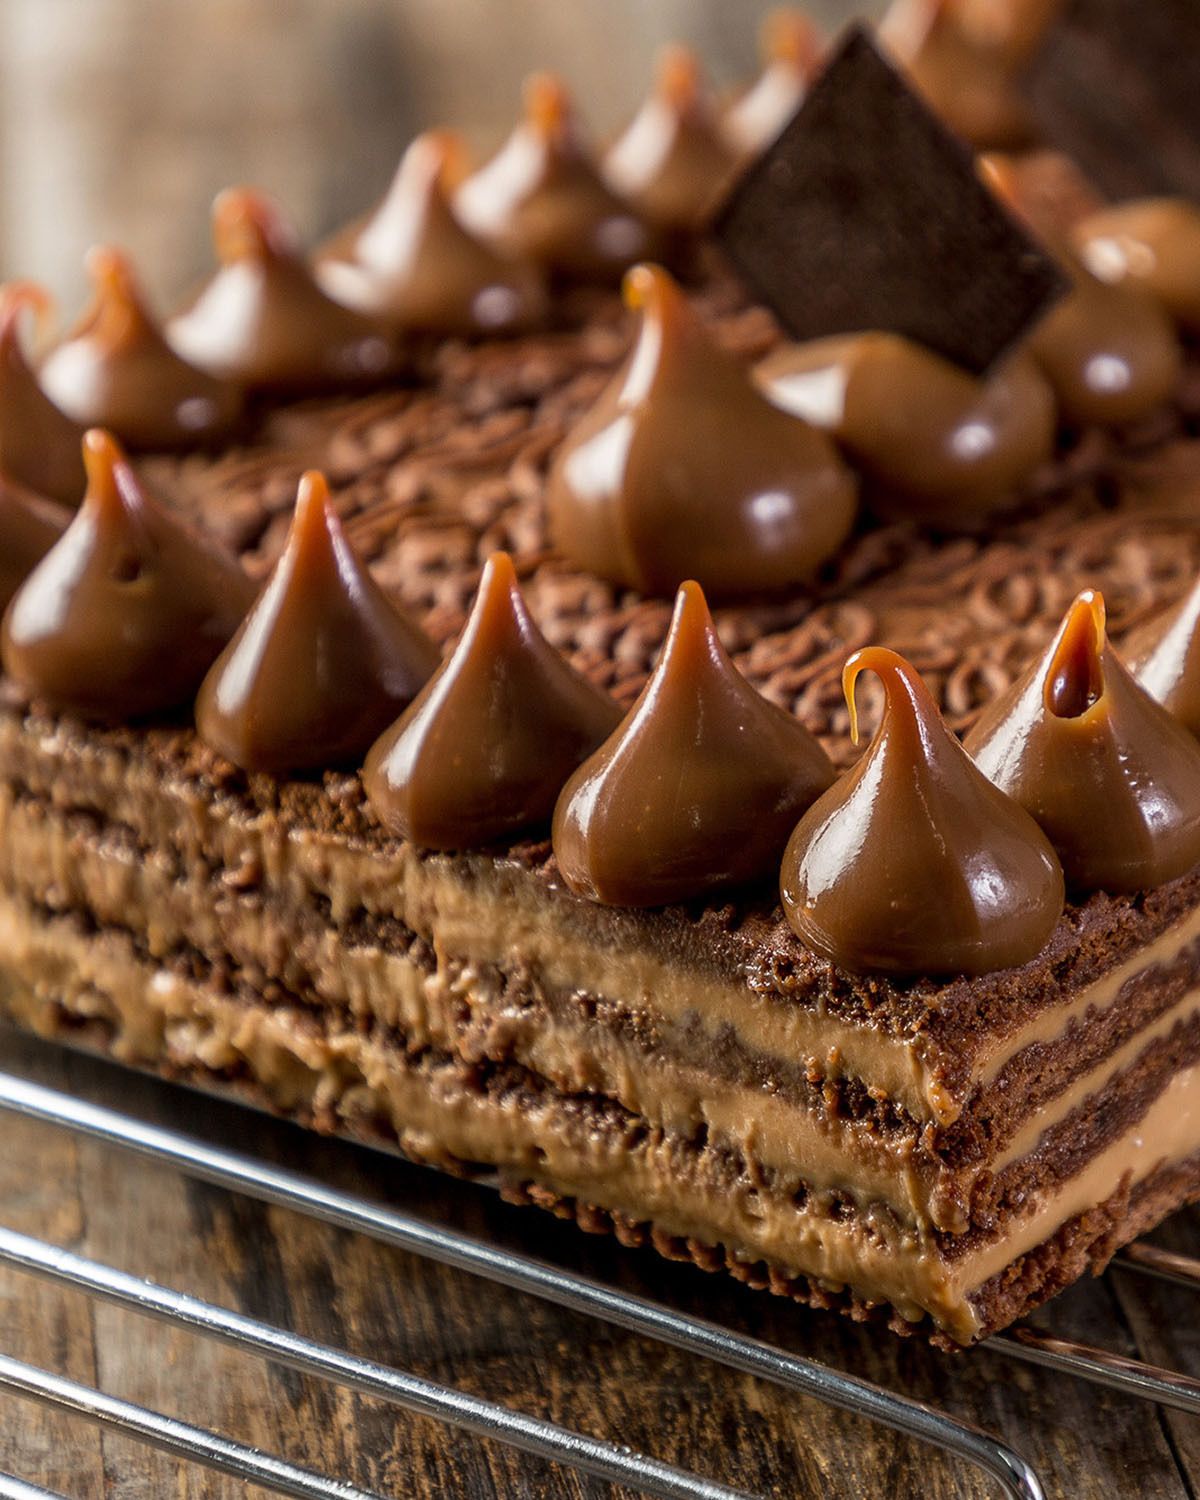 23 Basic Pastries, Cakes and Desserts For Bakers and Pastry Chef